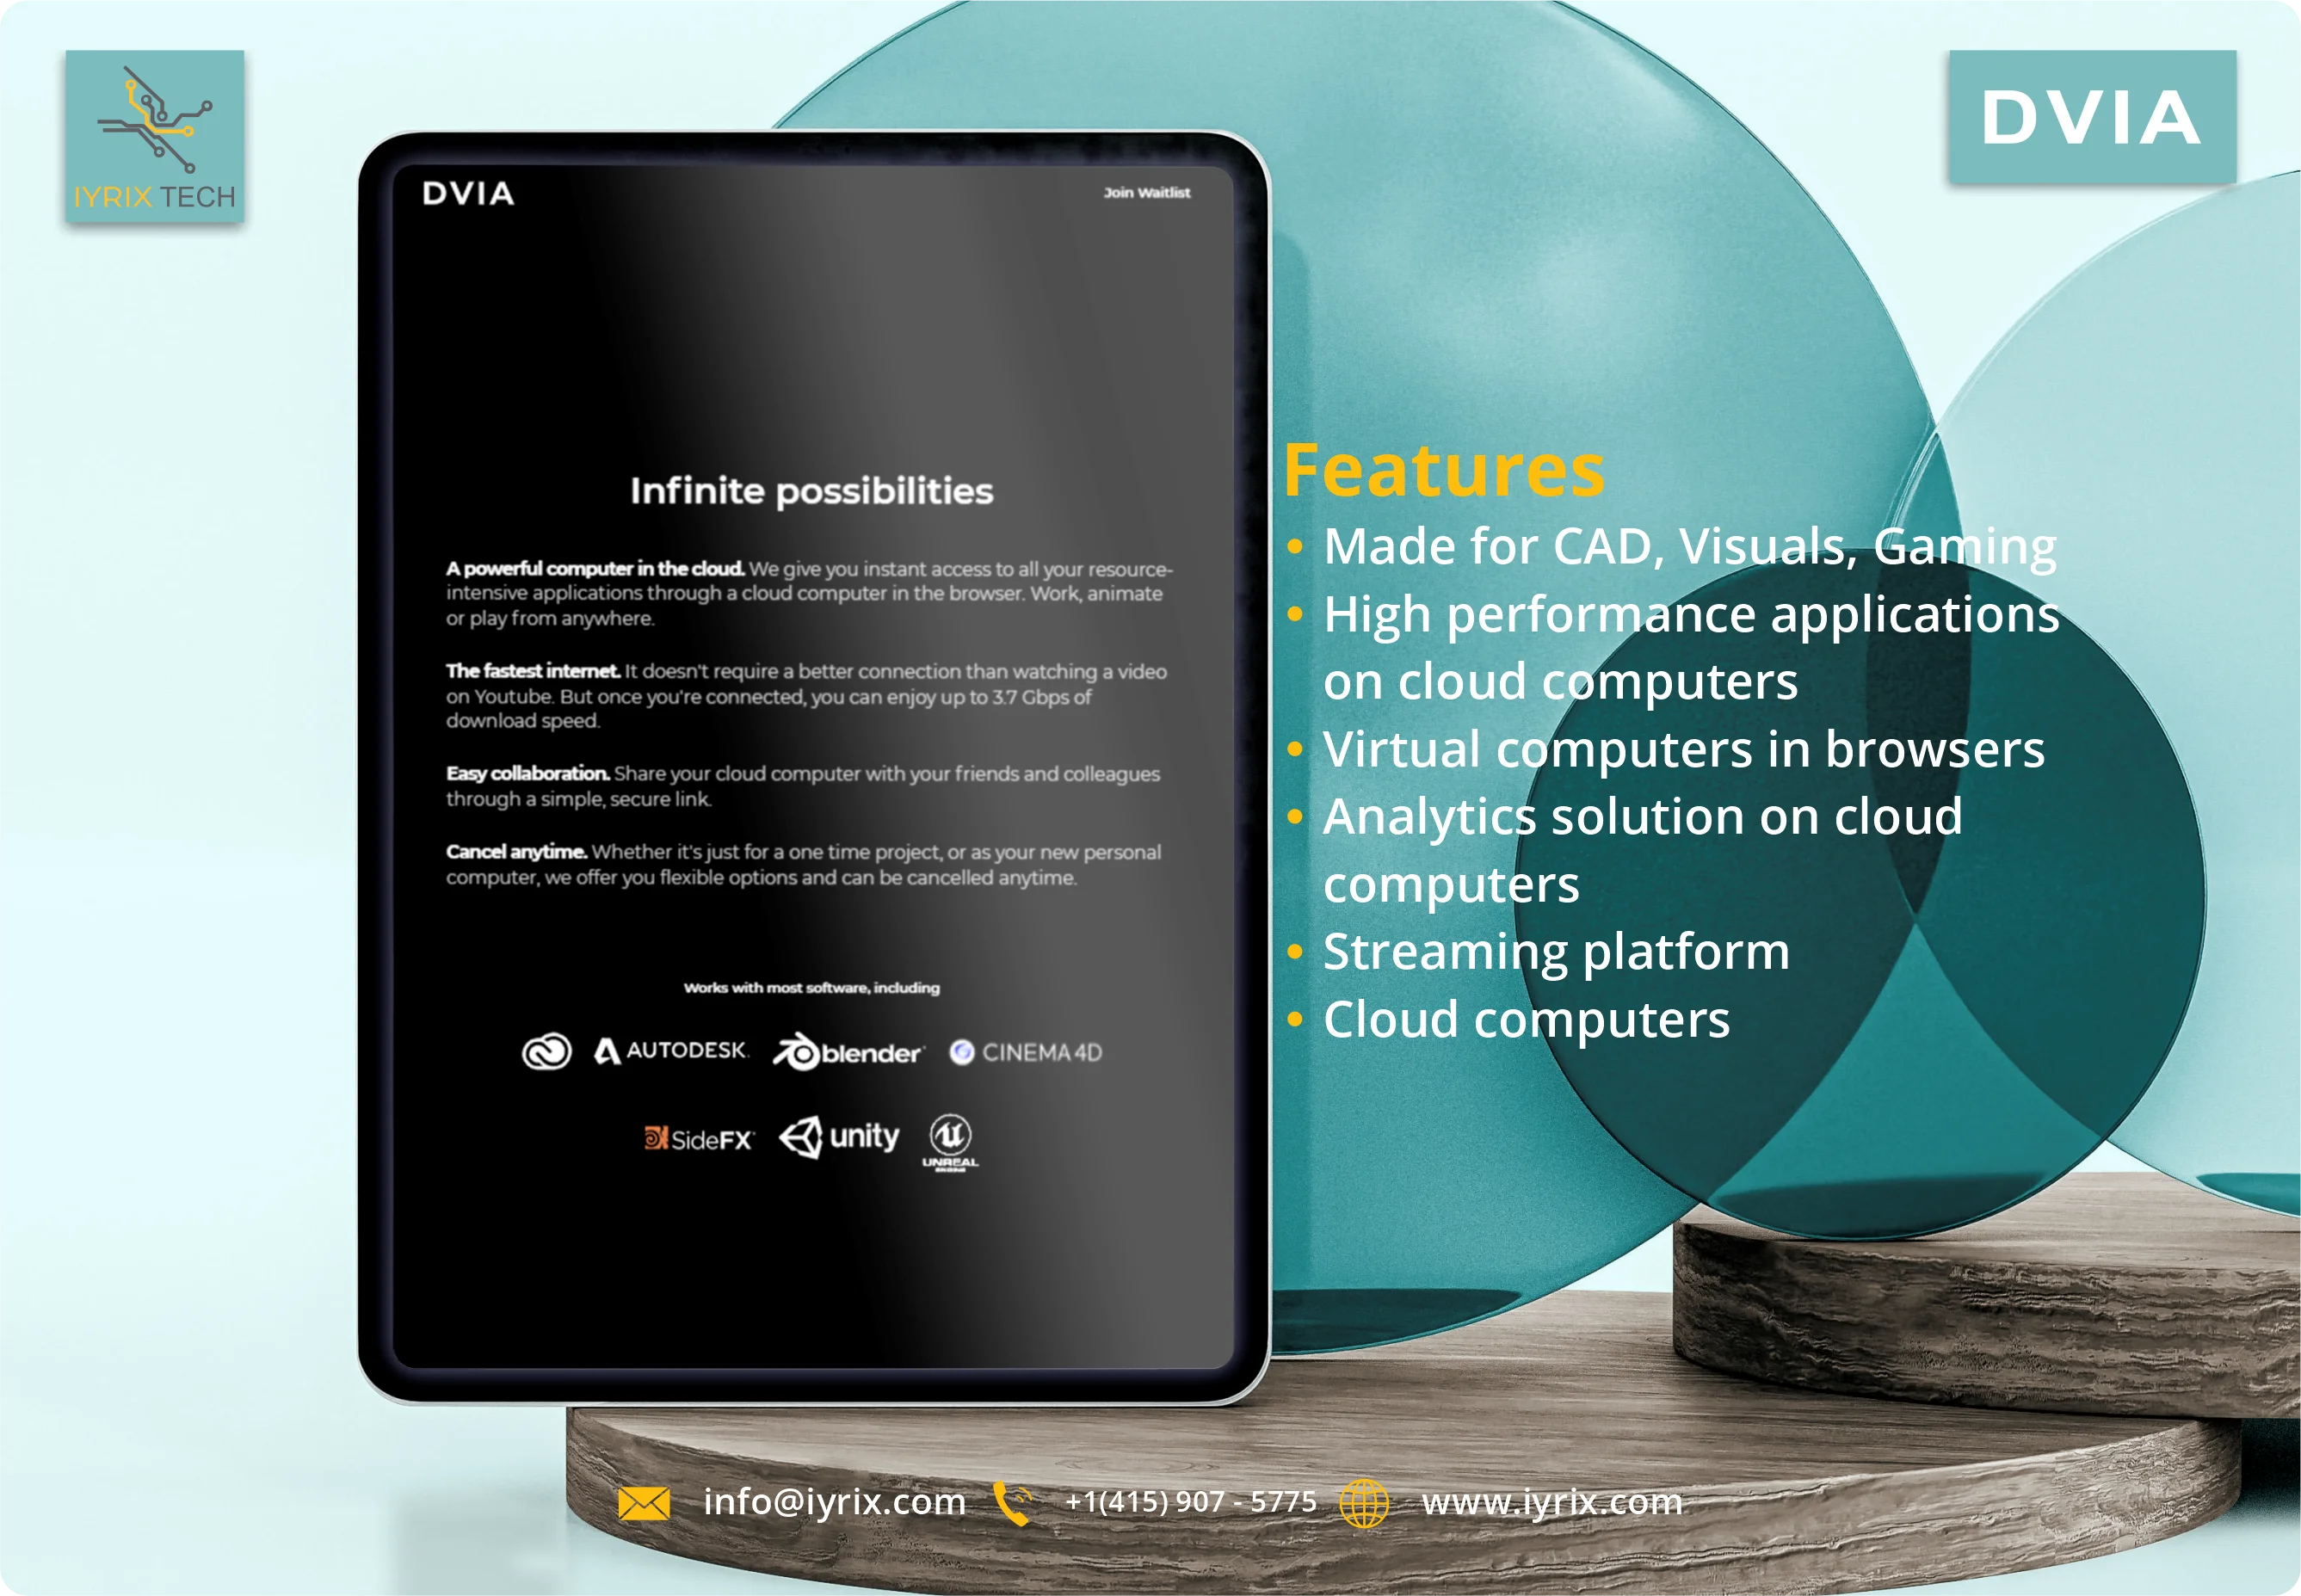 Made for CAD, Visuals, Gaming
                                                                High performance applications
                                                                on cloud computers
                                                                Virtual computers in browsers
                                                                Analytics solution on cloud
                                                                computers
                                                                Streaming platform
                                                                Cloud computers
                                                                